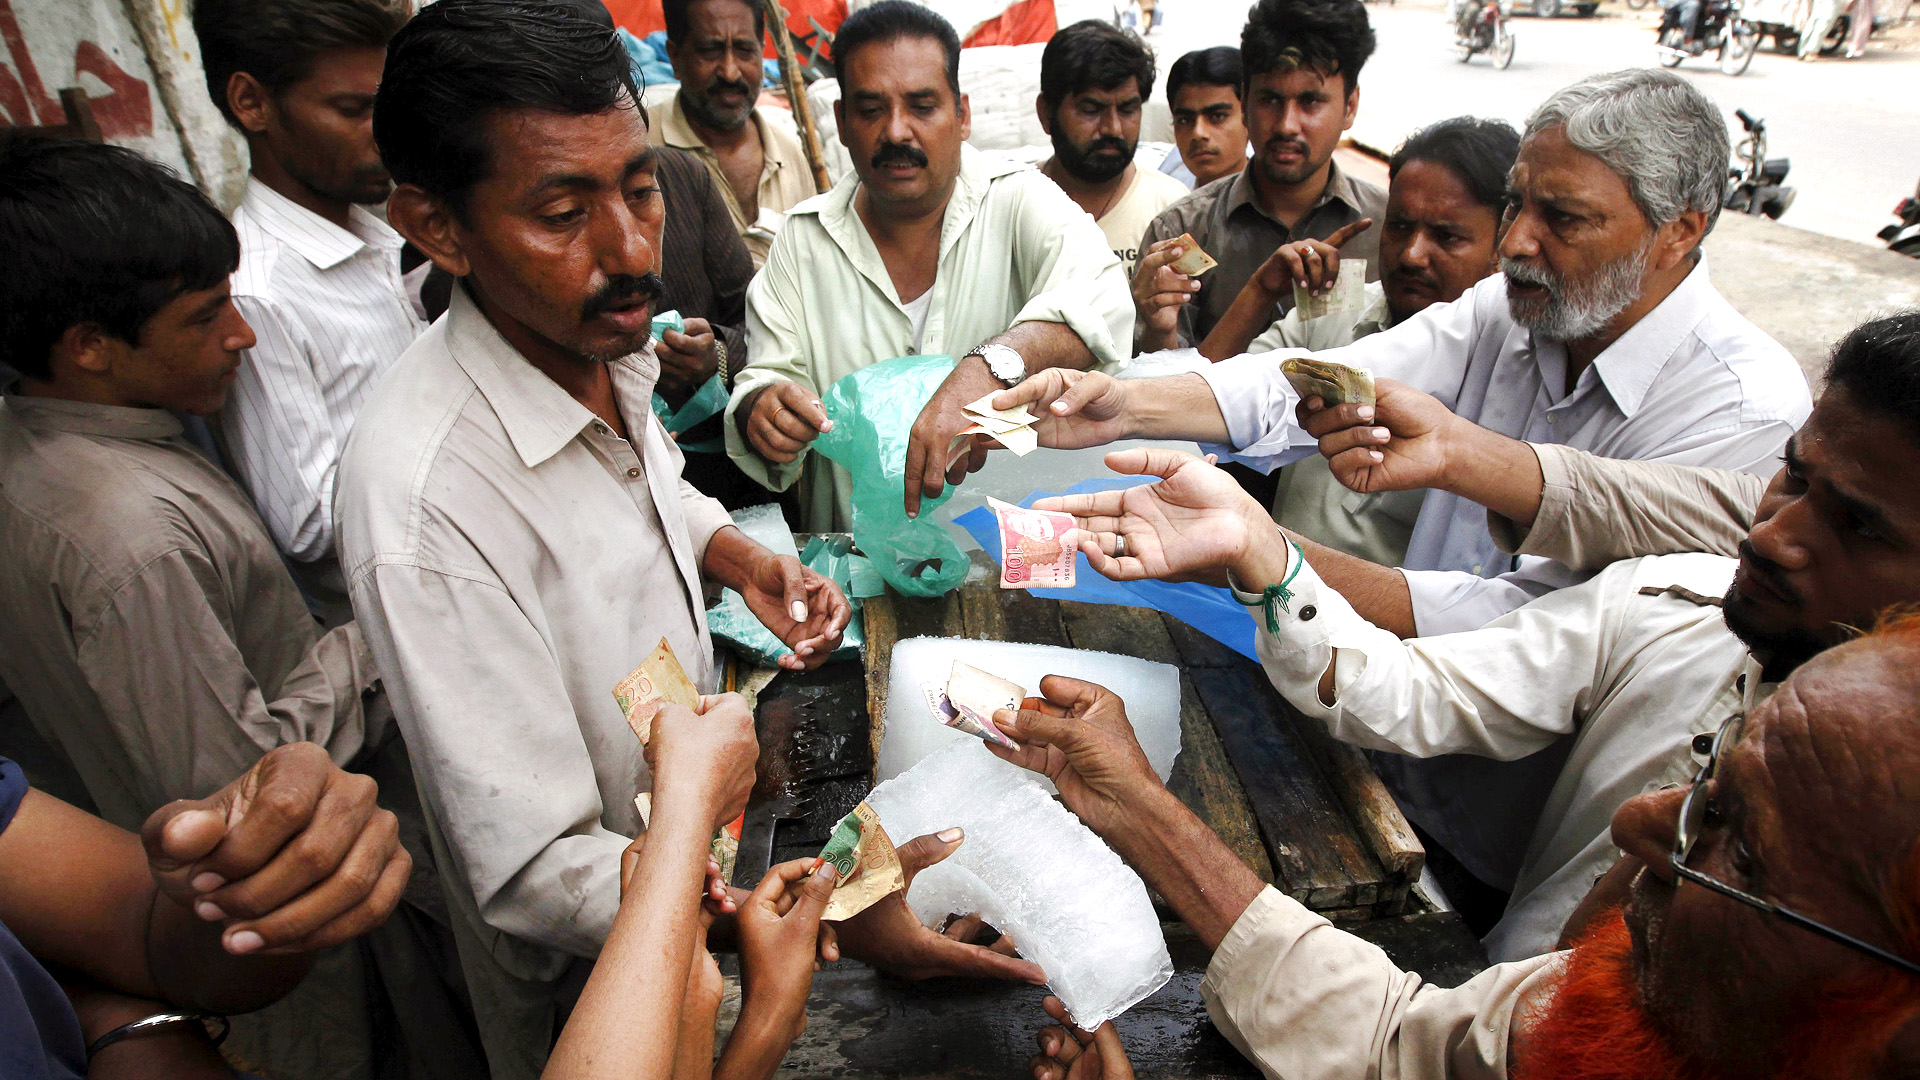 People buy ice blocks from a vendor along a road during a heat wave in Karachi, Pakistan. Pakistan's financial capital of Karachi is wilting in the four-day heat wave that has killed more than 780 people, a health charity said on Wednesday, as the government declared a holiday in the city to encourage people to stay home and cool off. Photo: Reuters